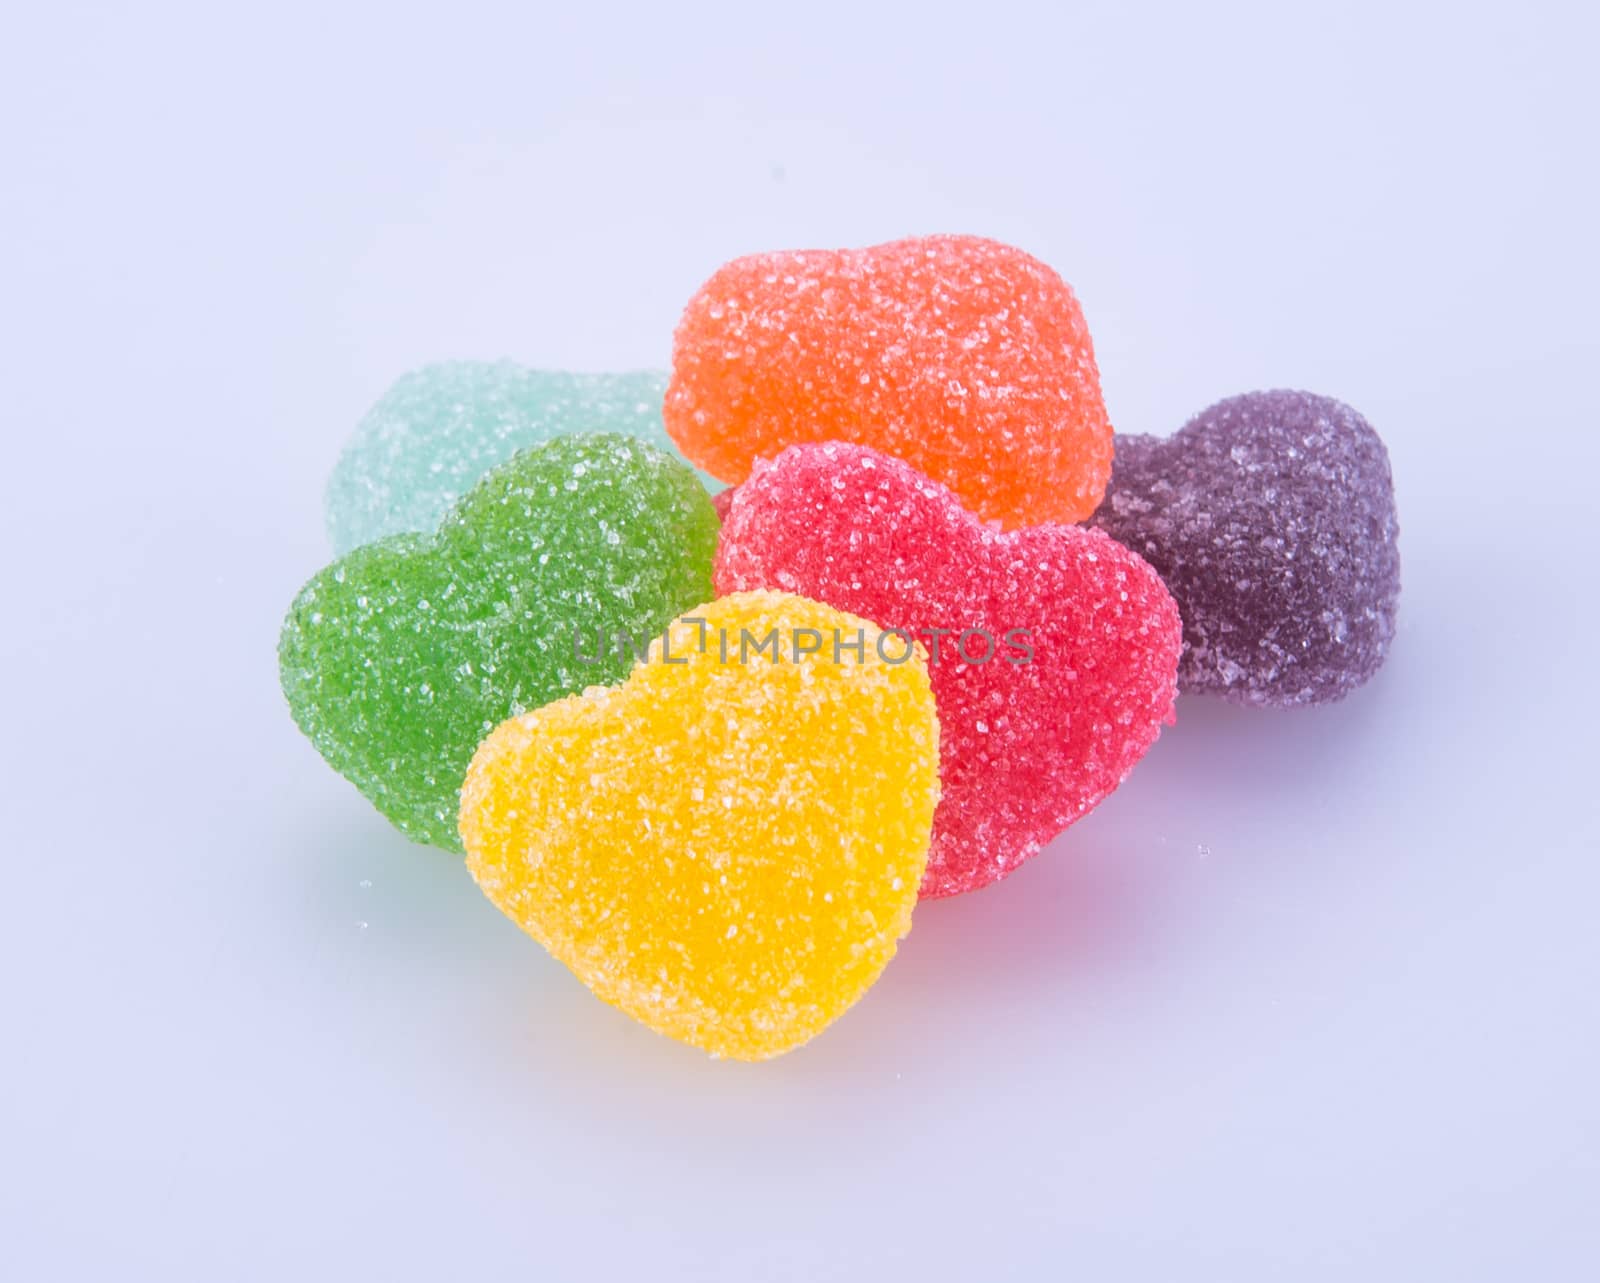 candies. jelly candies on a background. jelly candies on a backg by heinteh